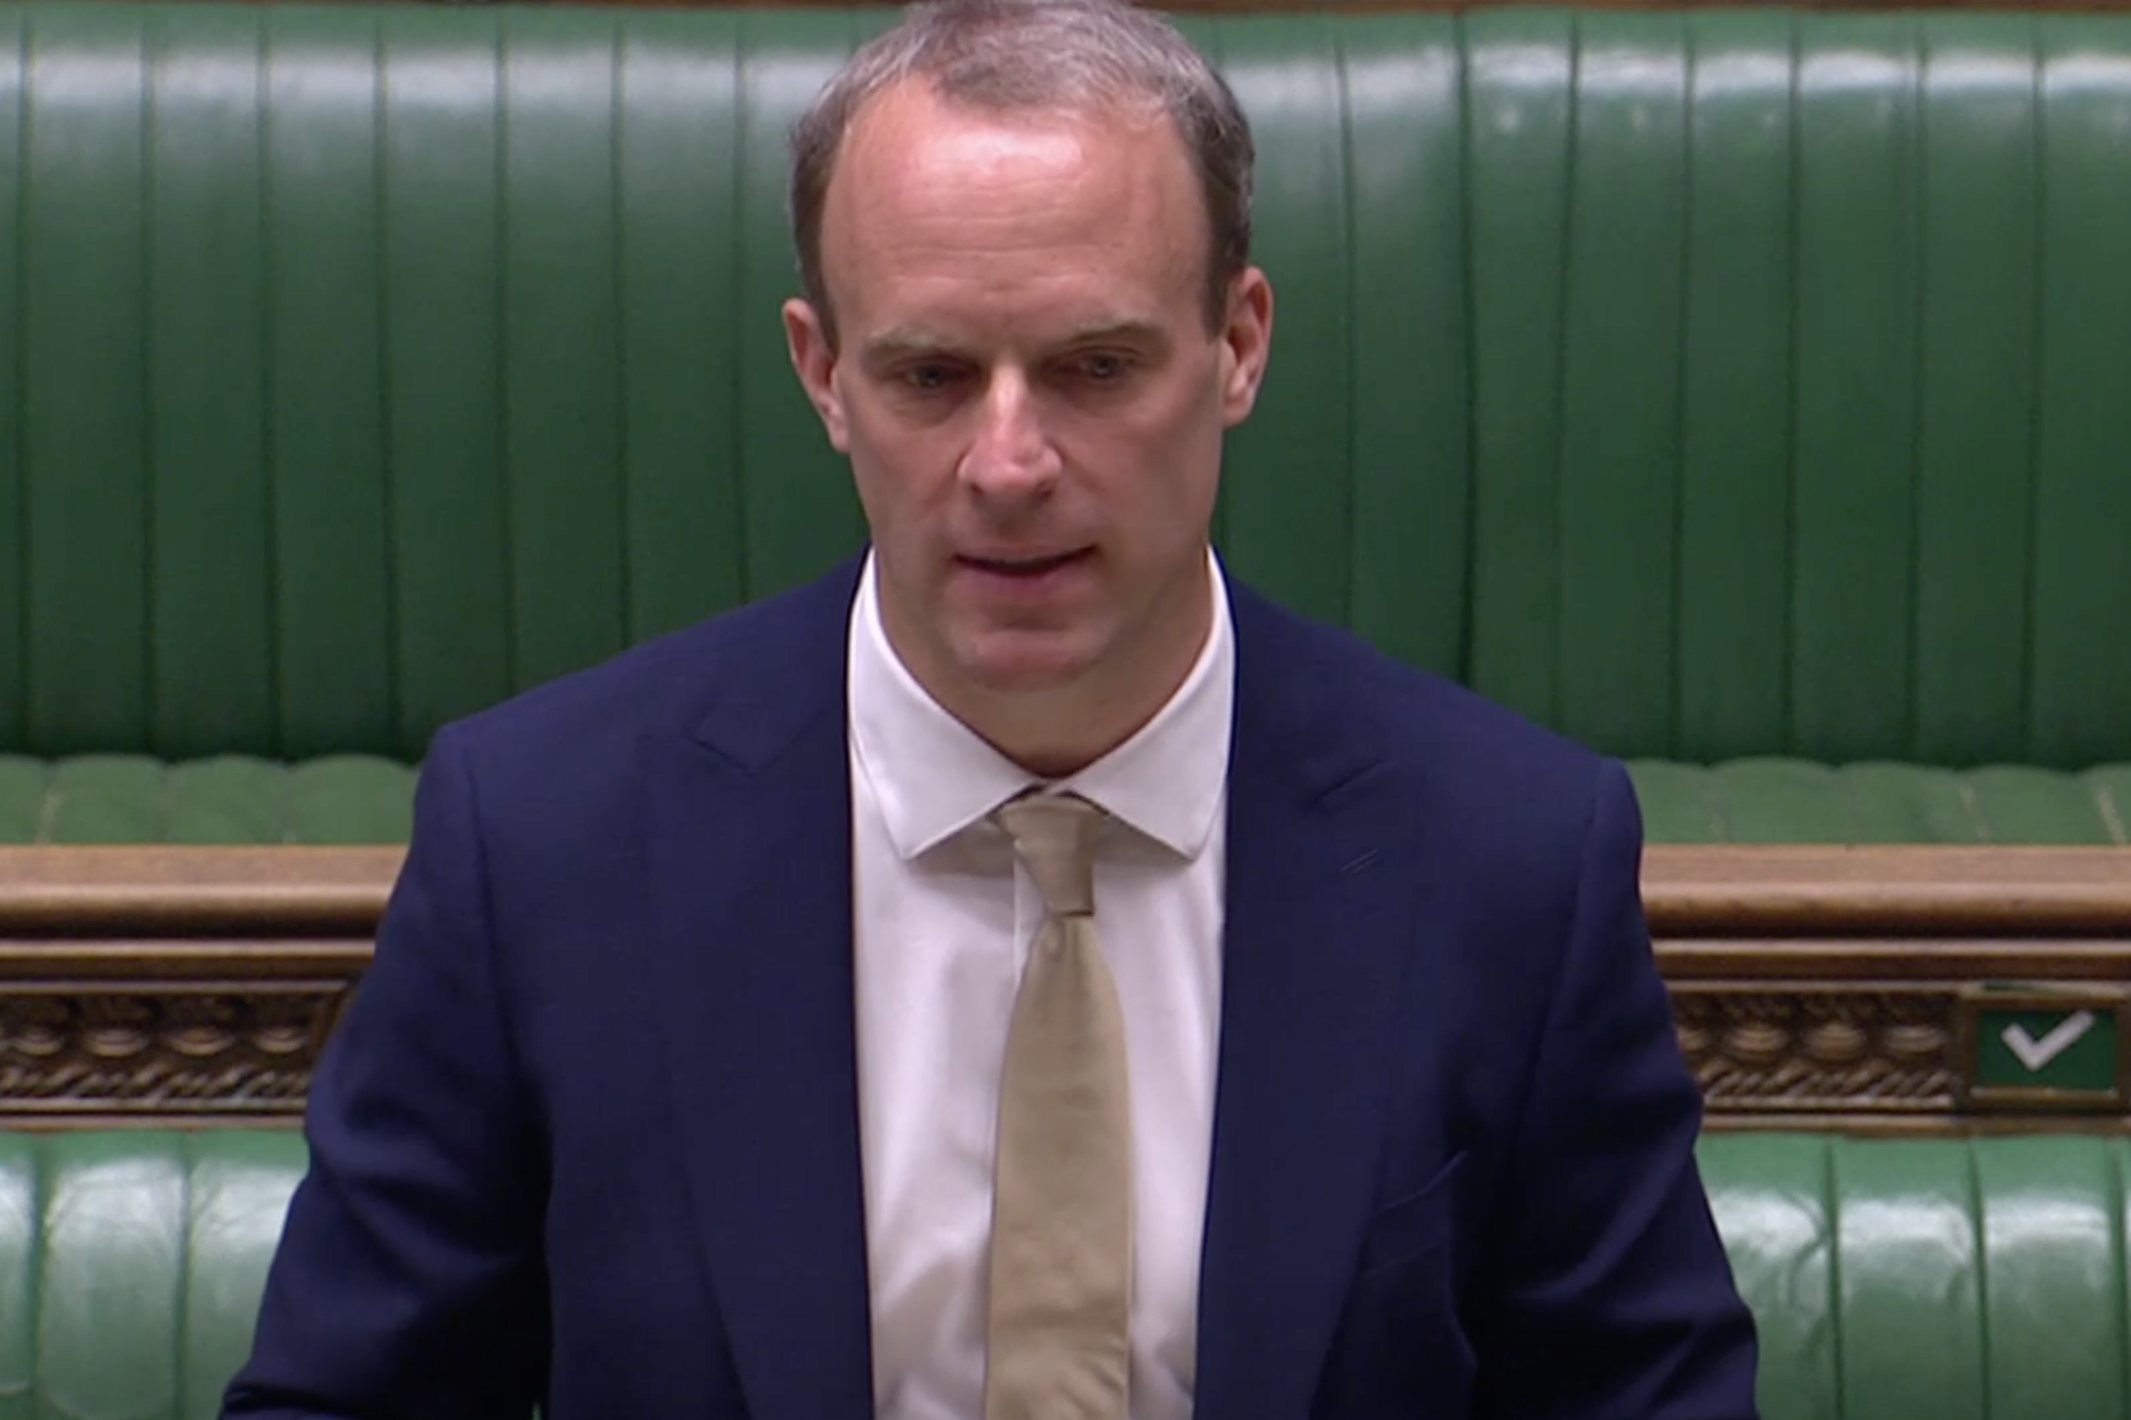 Dominic Raab has faced questions over the case in parliament